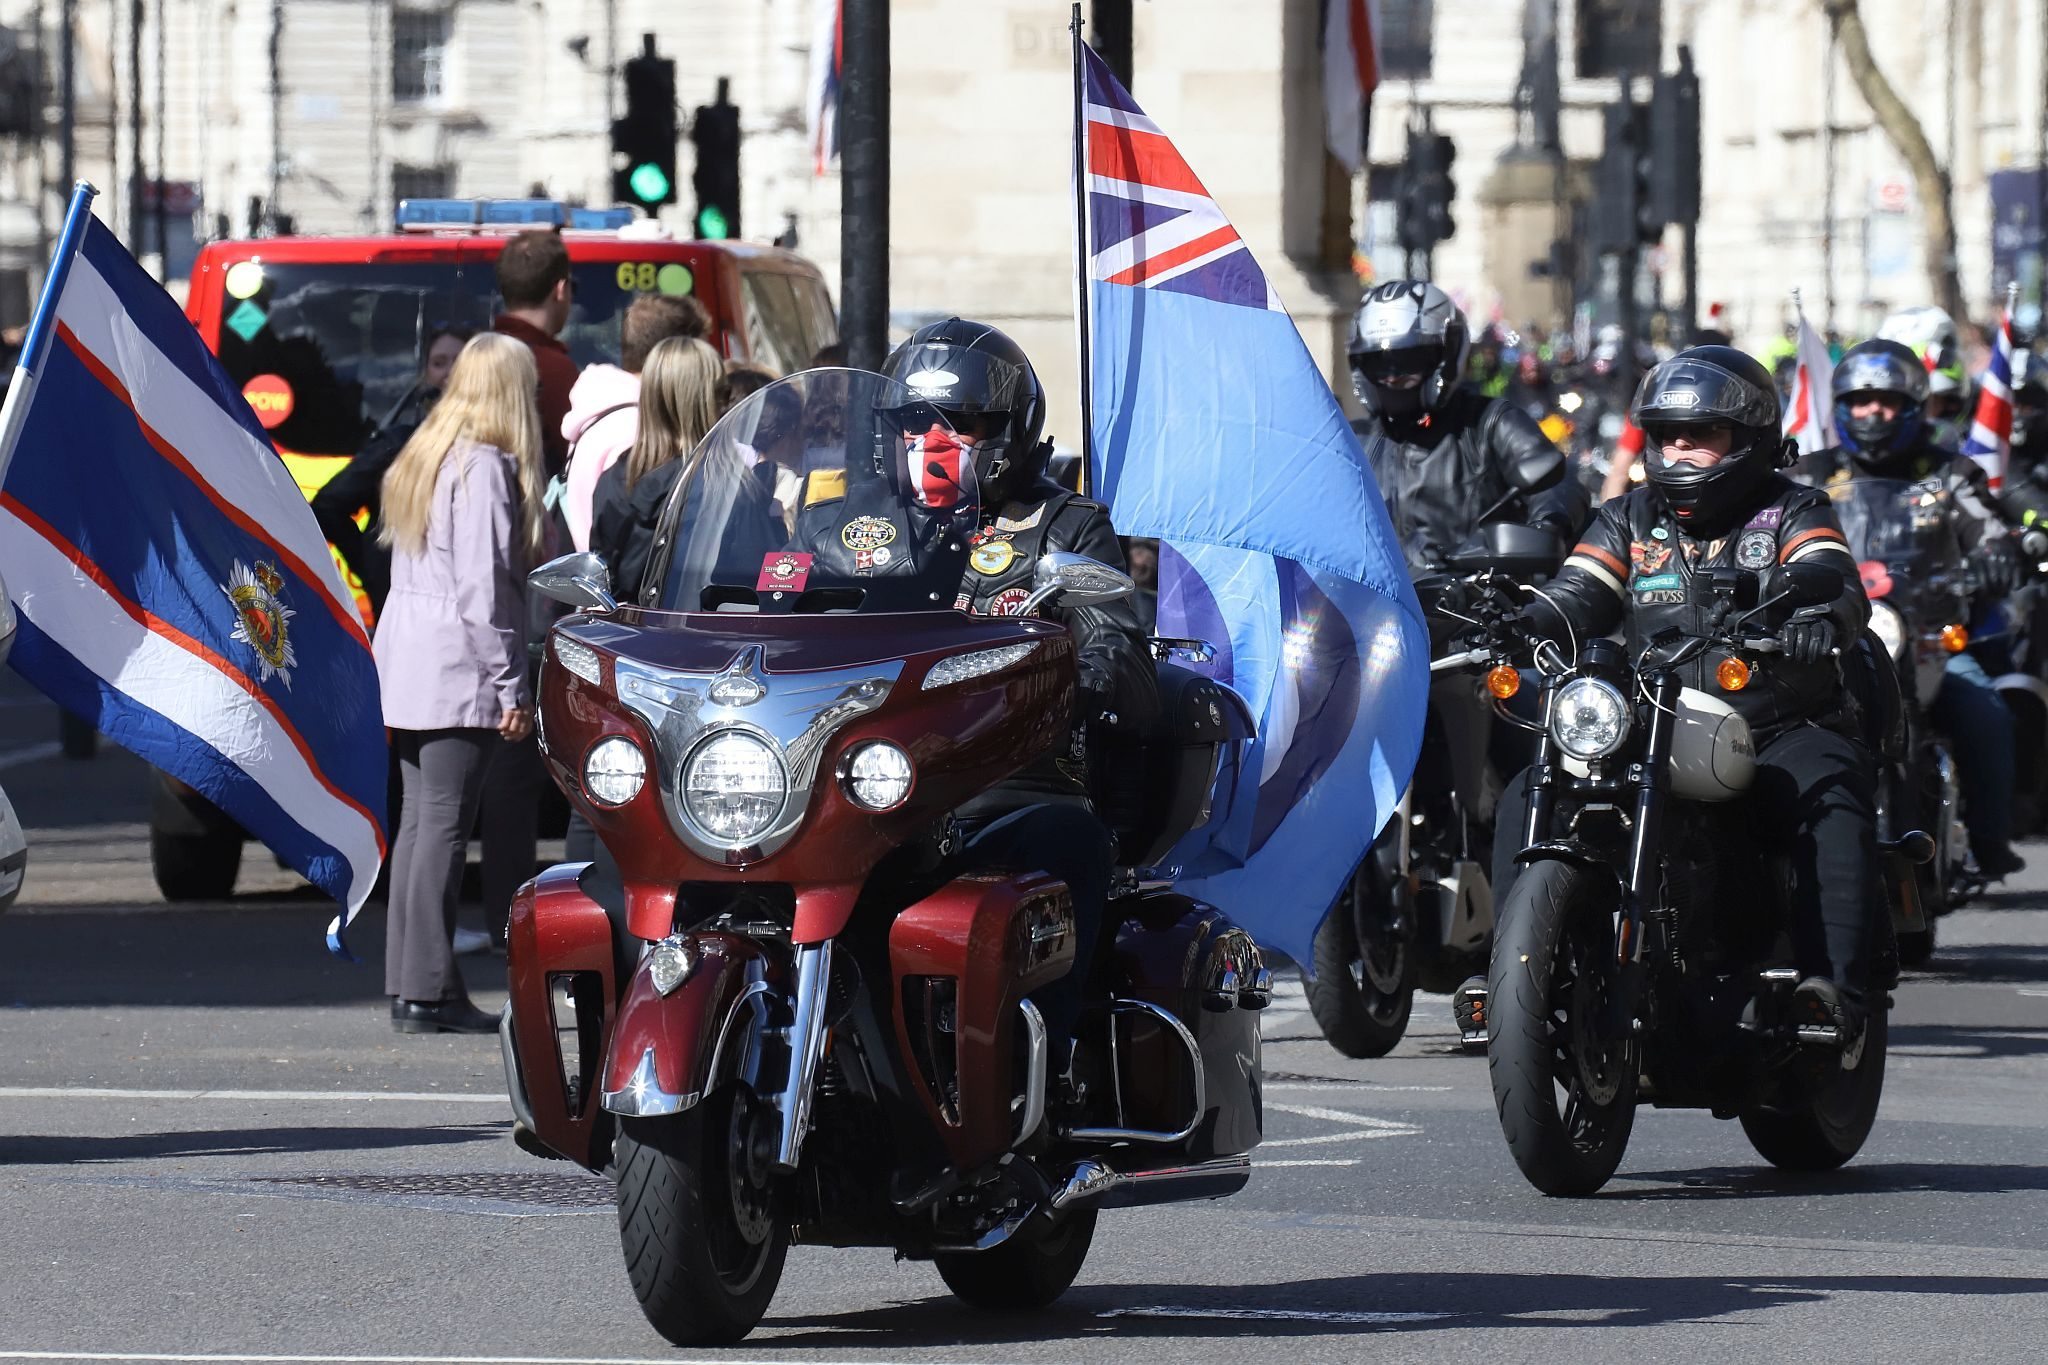 The Rolling Thunder UK military veterans motorcycle Ride of Respect, in memory of the late HM Queen Elizabeth II. 7th April 2023, Good Friday. Photographed in Whitehall, Westminster, London passing The Cenotaph war memorial and 10 Downing Street. Armed forces veterans. RAF. Royal Air Force.